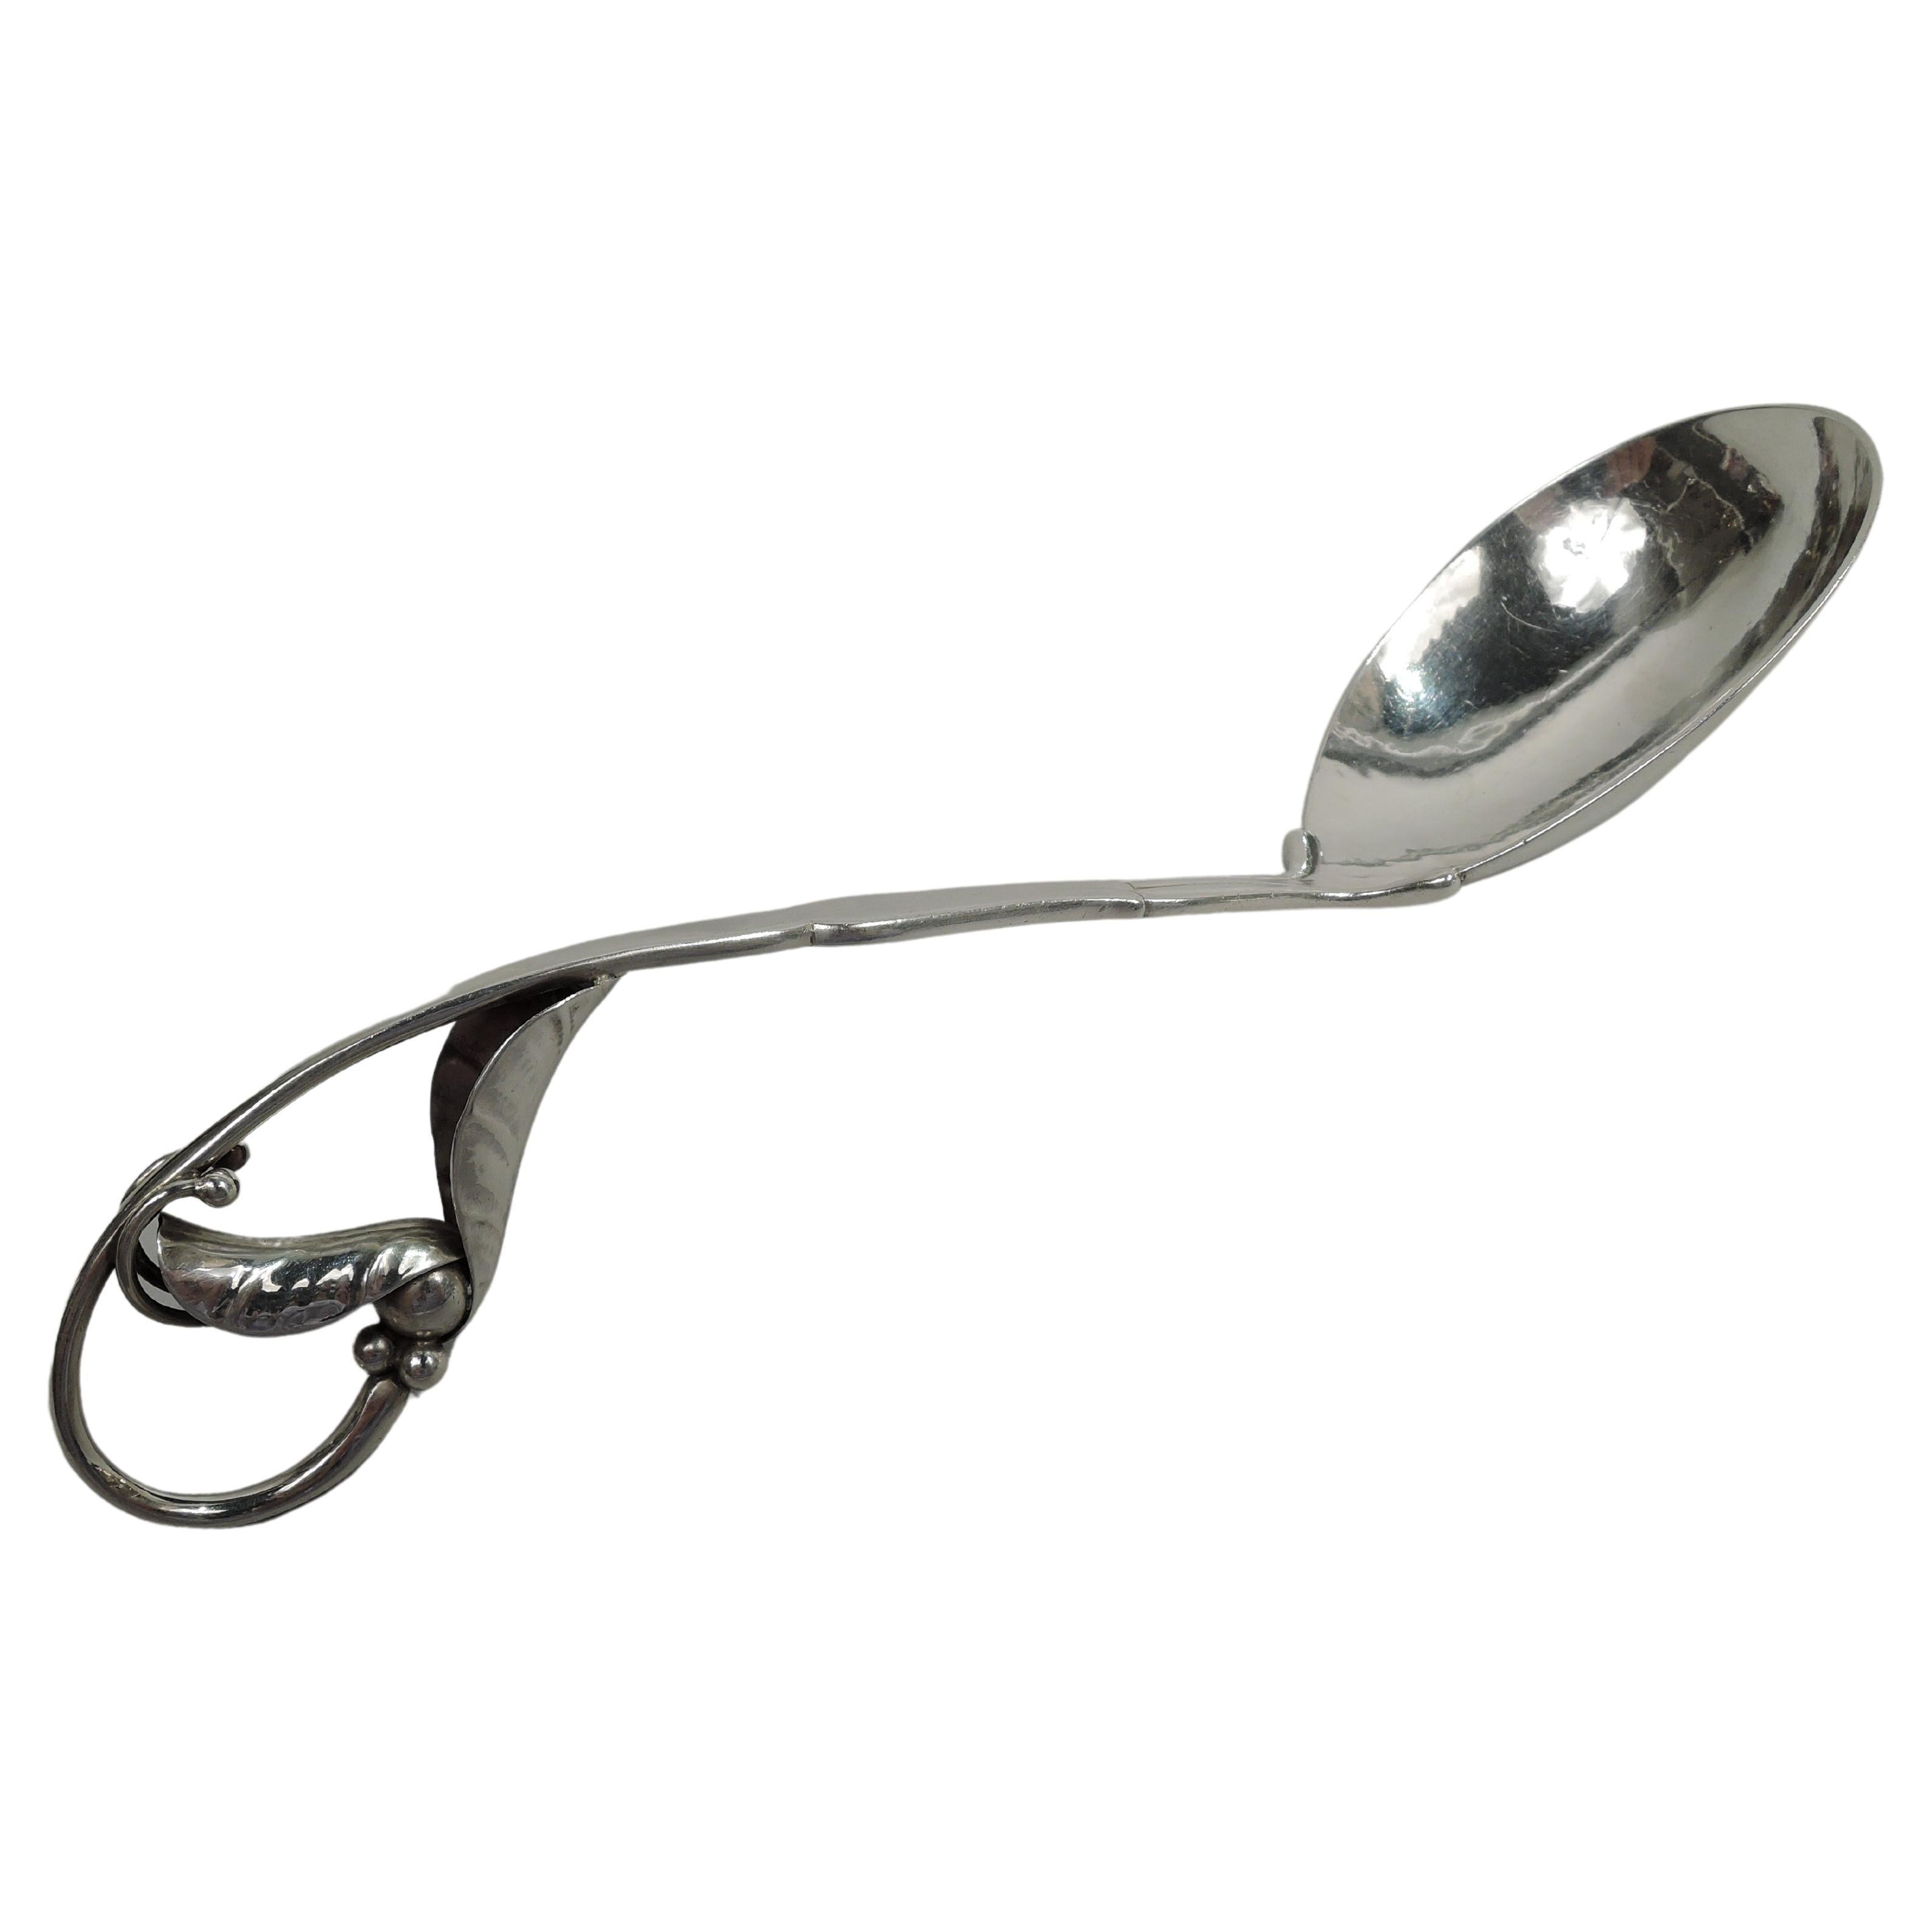 Early Georg Jensen Serving Spoon with English Import Marks